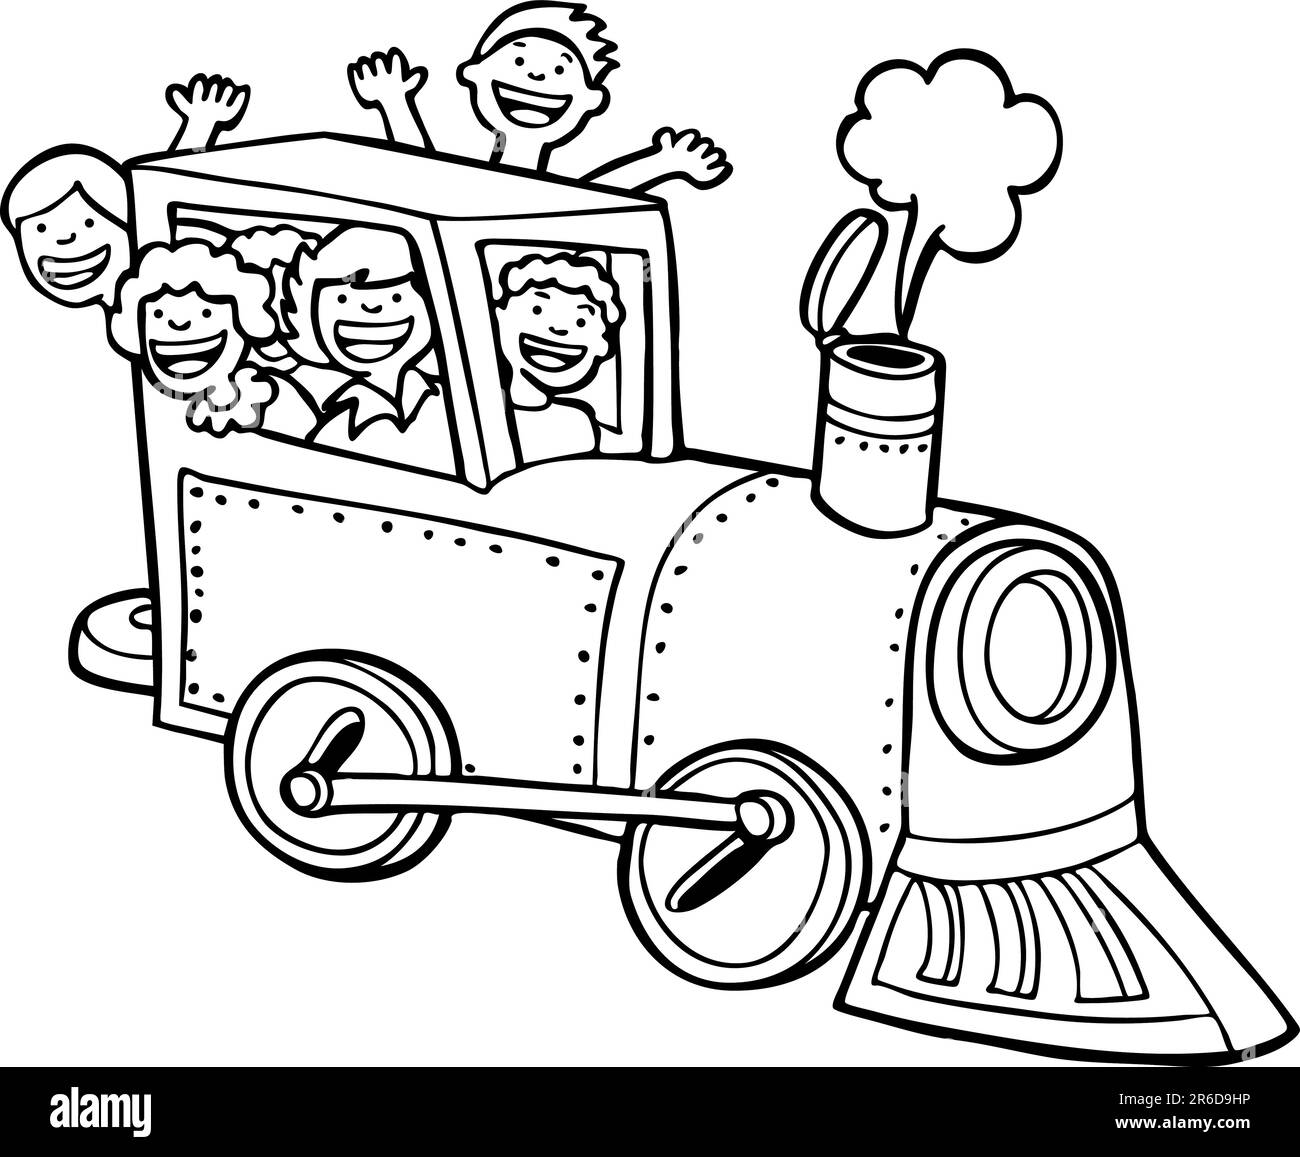 Group of children having fun riding in a train - black and white / no background. Stock Vector